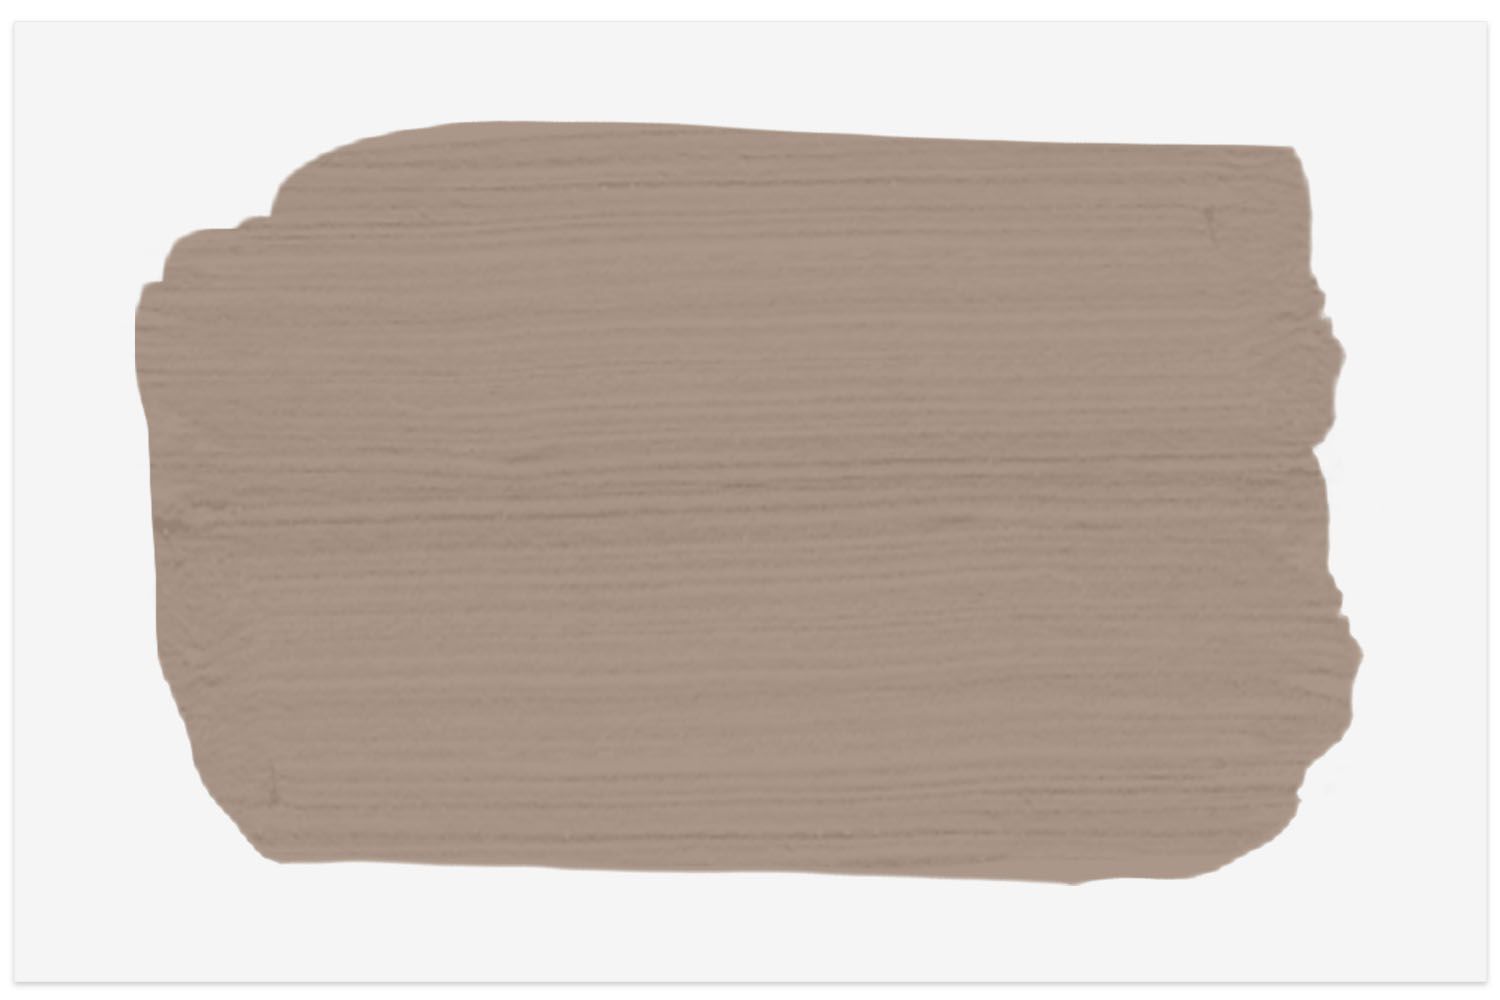 Behr Chic Taupe Farbmuster